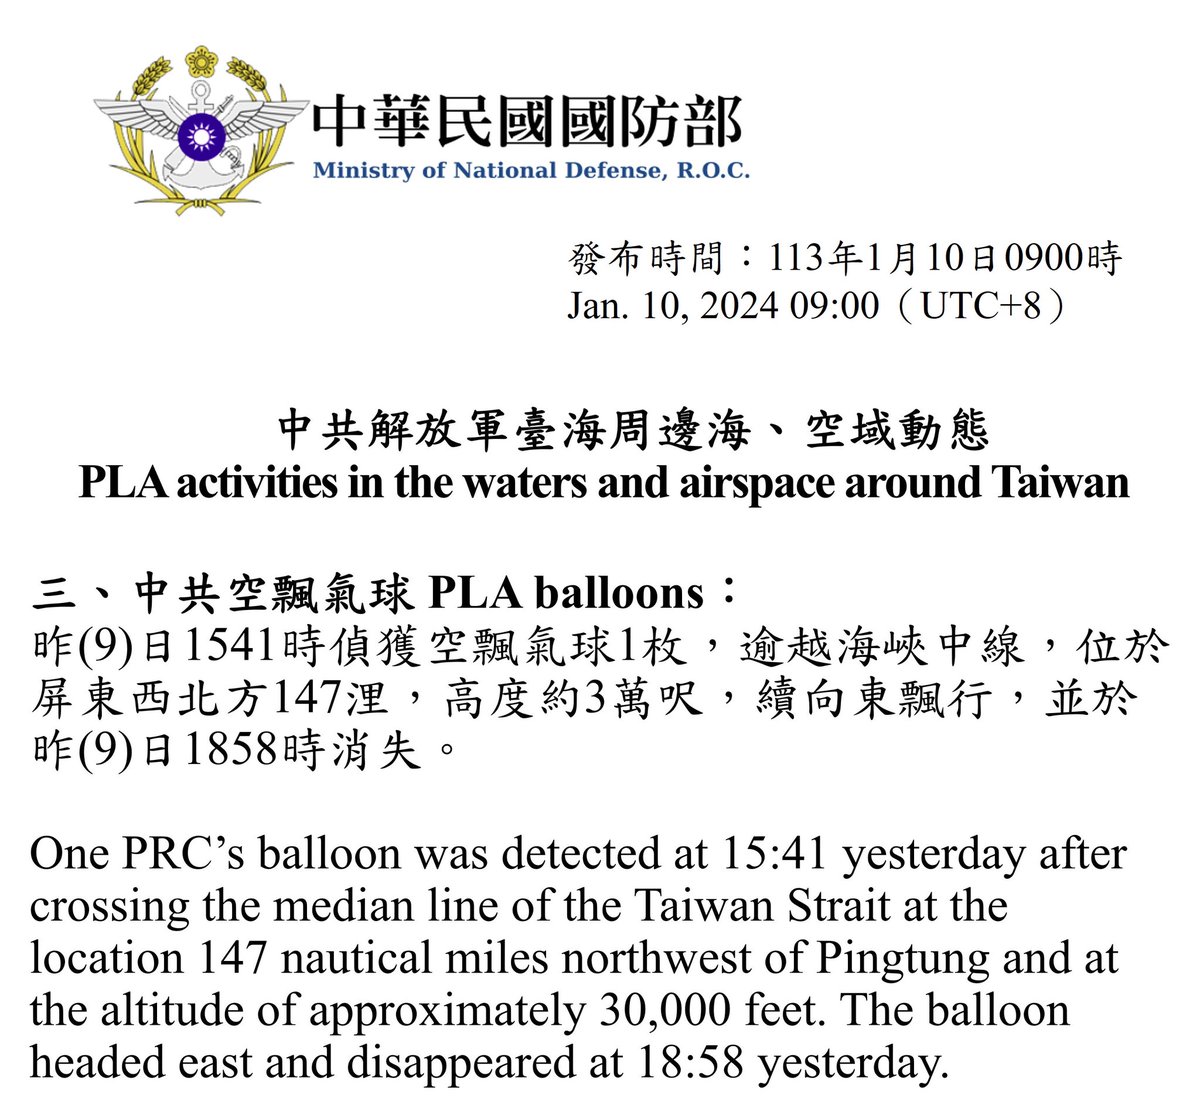 Taiwan Ministry of Defense:8 PLA aircraft and 5 PLAN vessels around Taiwan were detected by 06:00 (UTC 8) today. 1 of the detected aircraft (BZK-005 UAV RECCE) had crossed the median line of the Taiwan Strait. ROCArmedForces have monitored the situation and tasked appropriate forces to respond